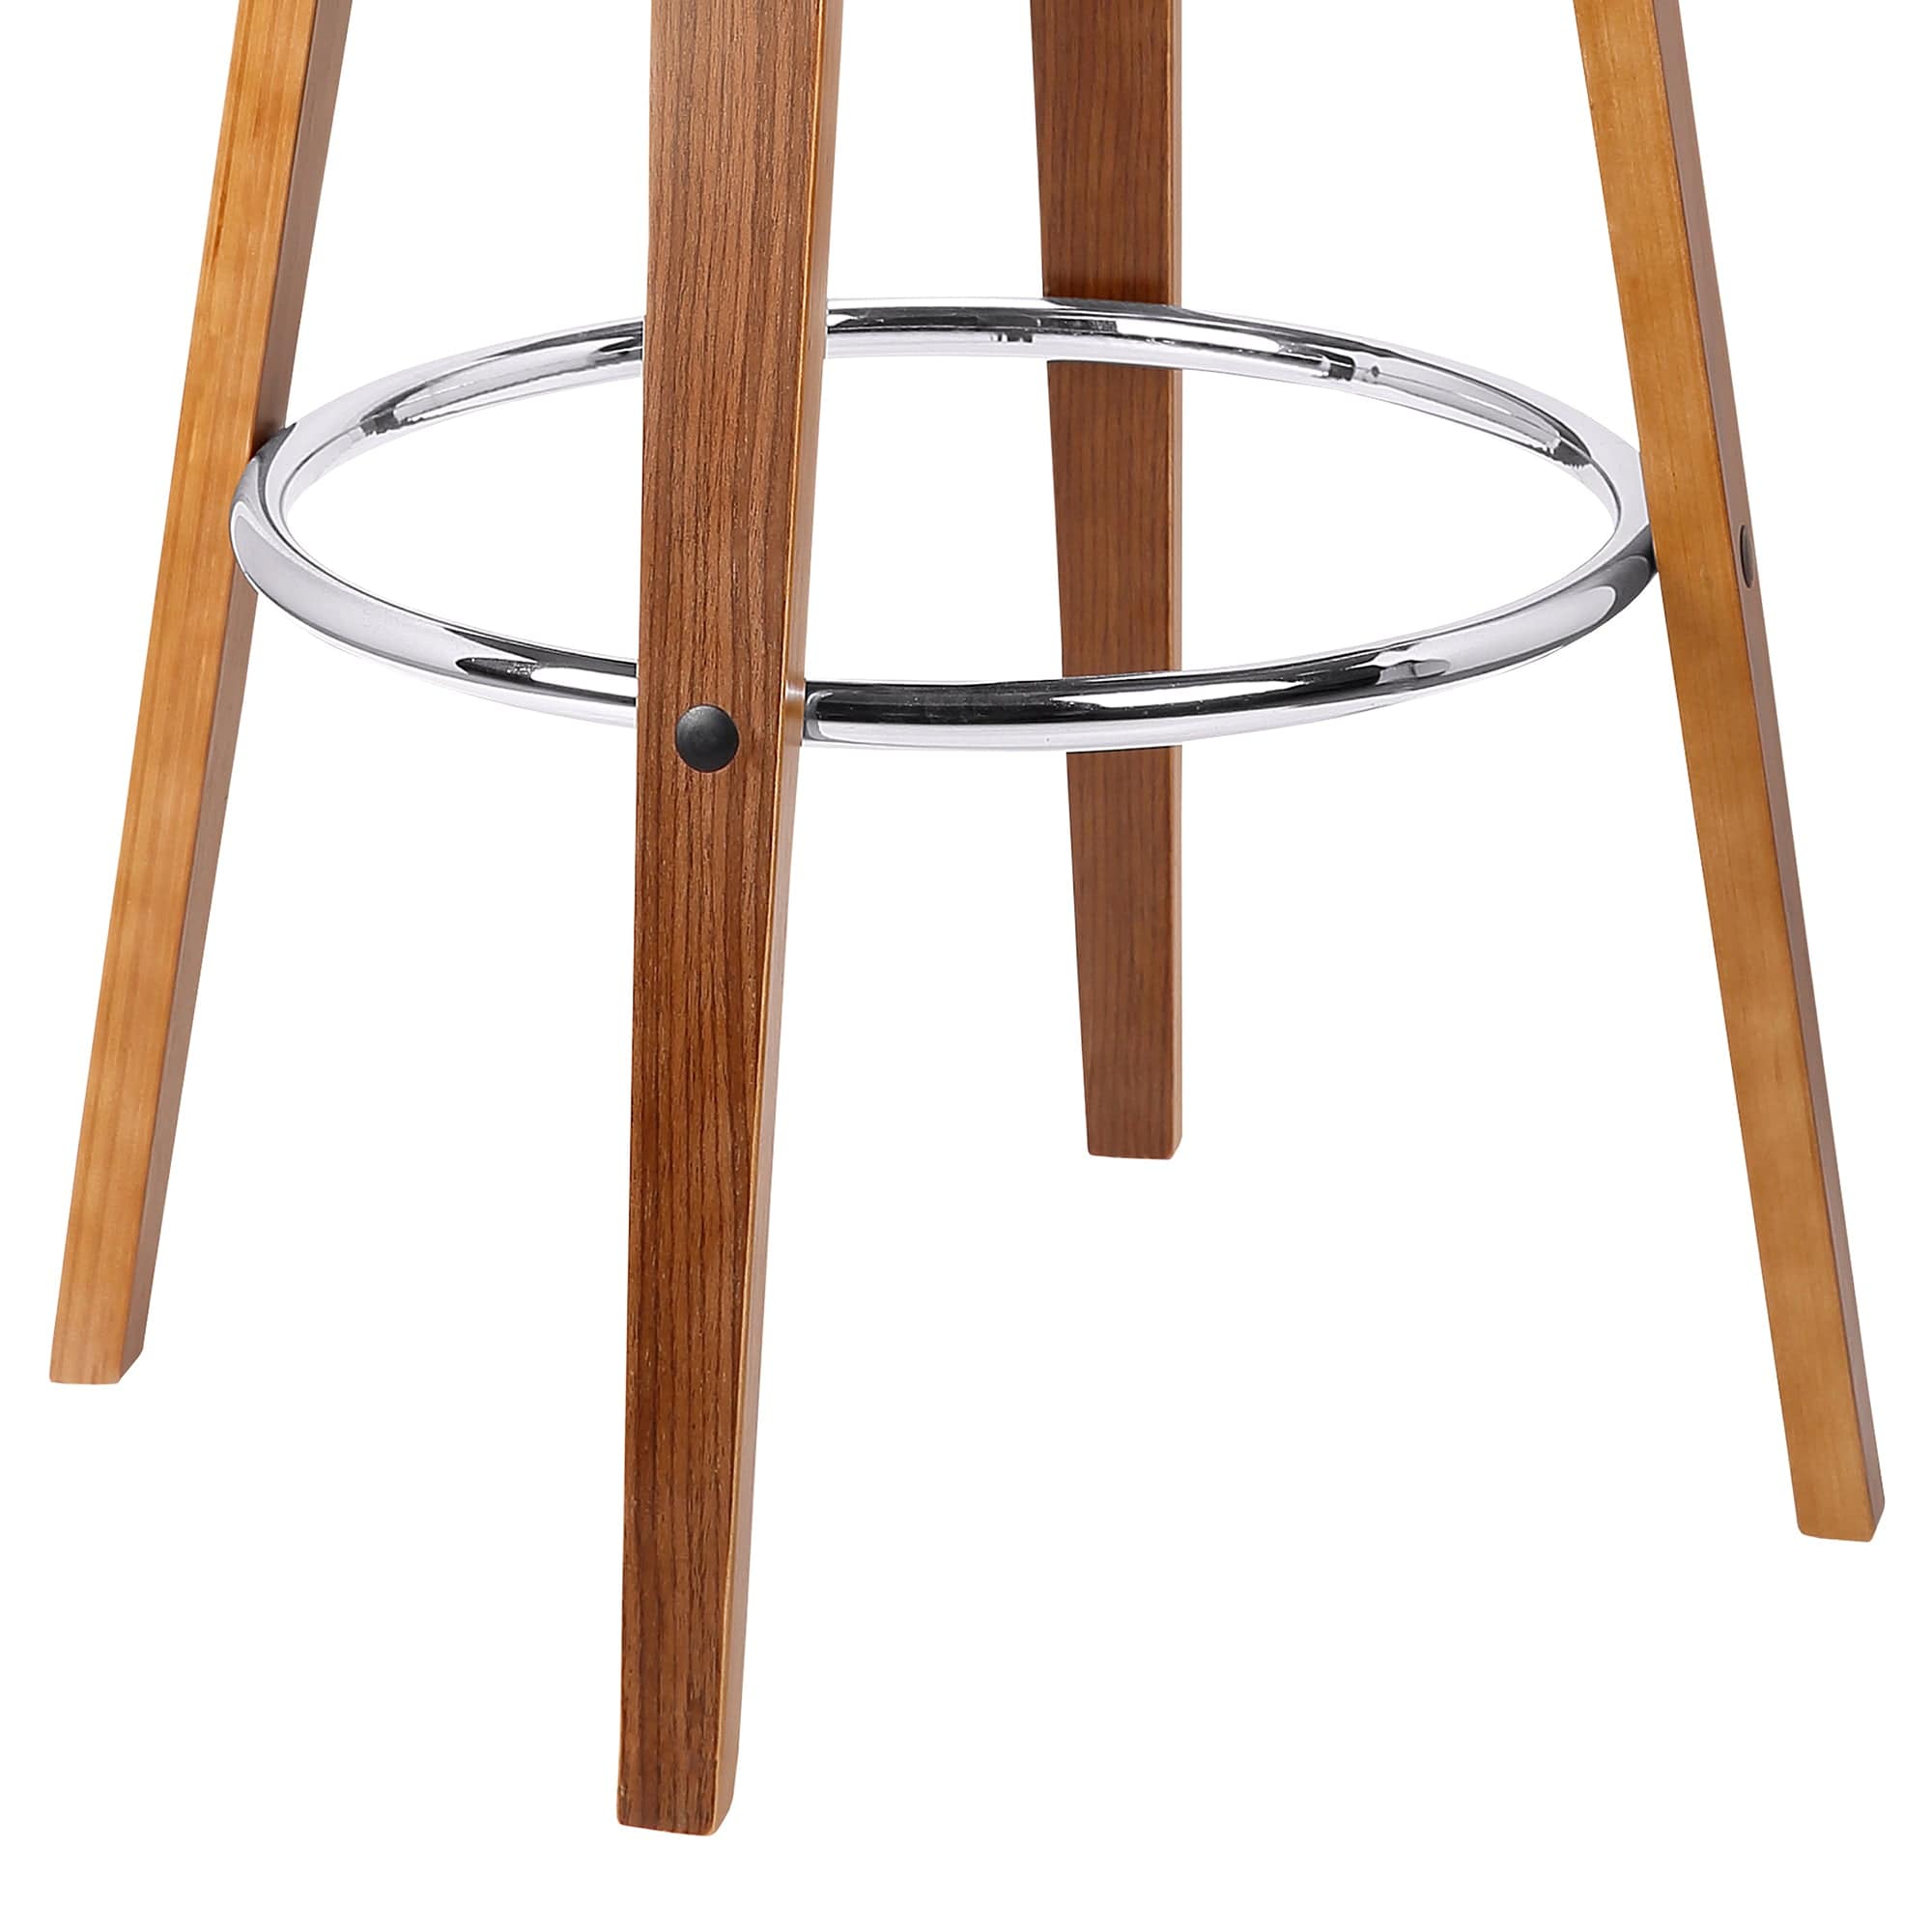 Armen Living Barstool Armen Living | Harbor 26" Counter Height Backless Swivel Brown Faux Leather and Walnut Wood Mid-Century Modern Bar Stool | LCHBBABRWA26